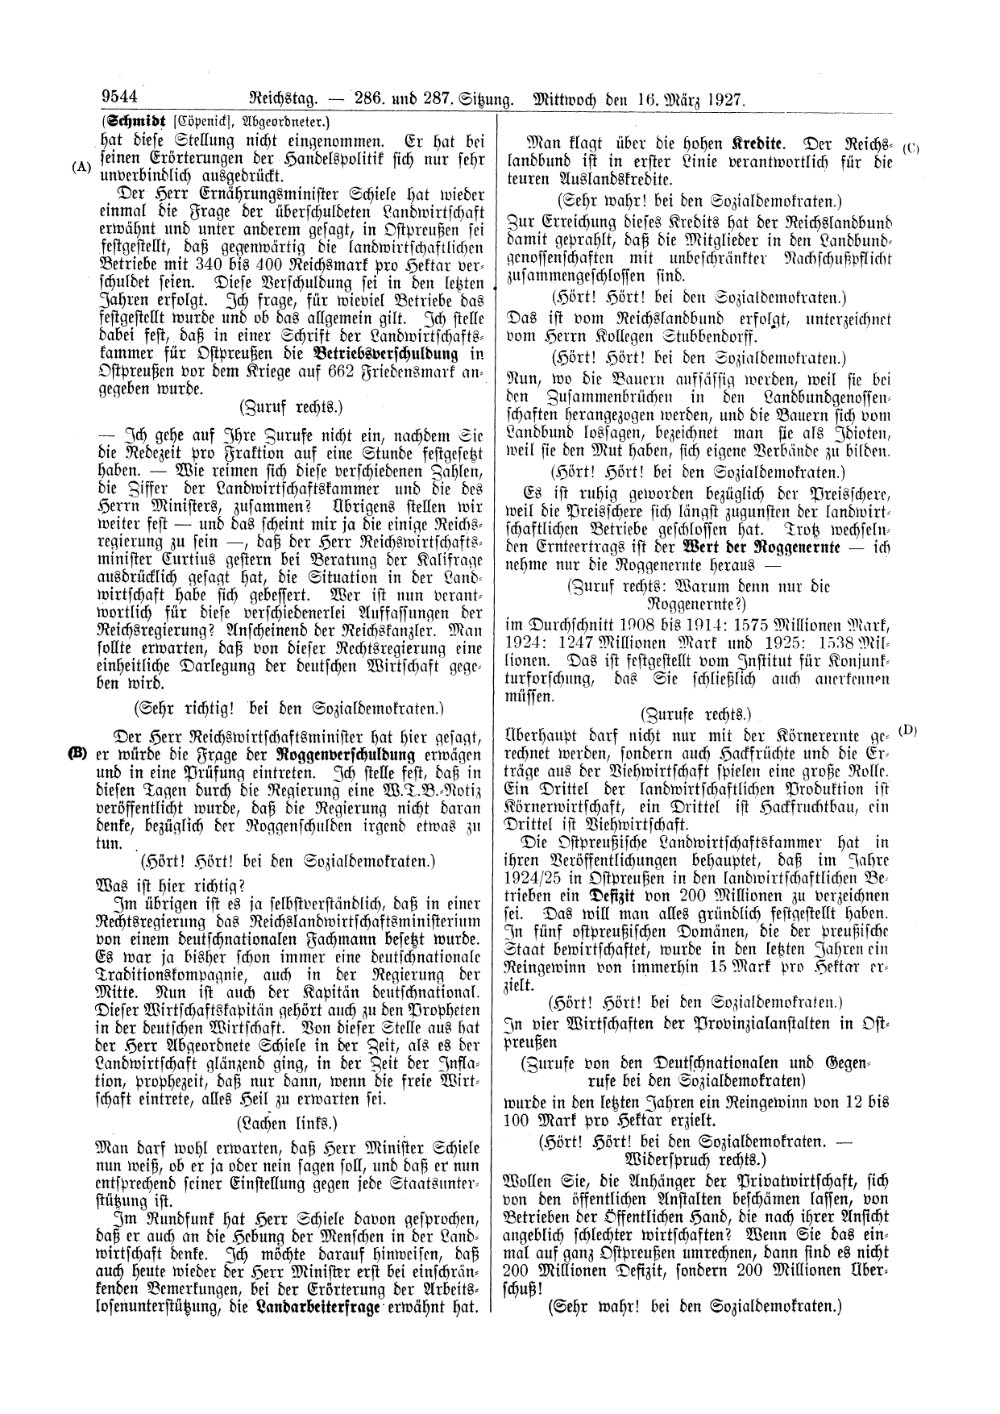 Scan of page 9544